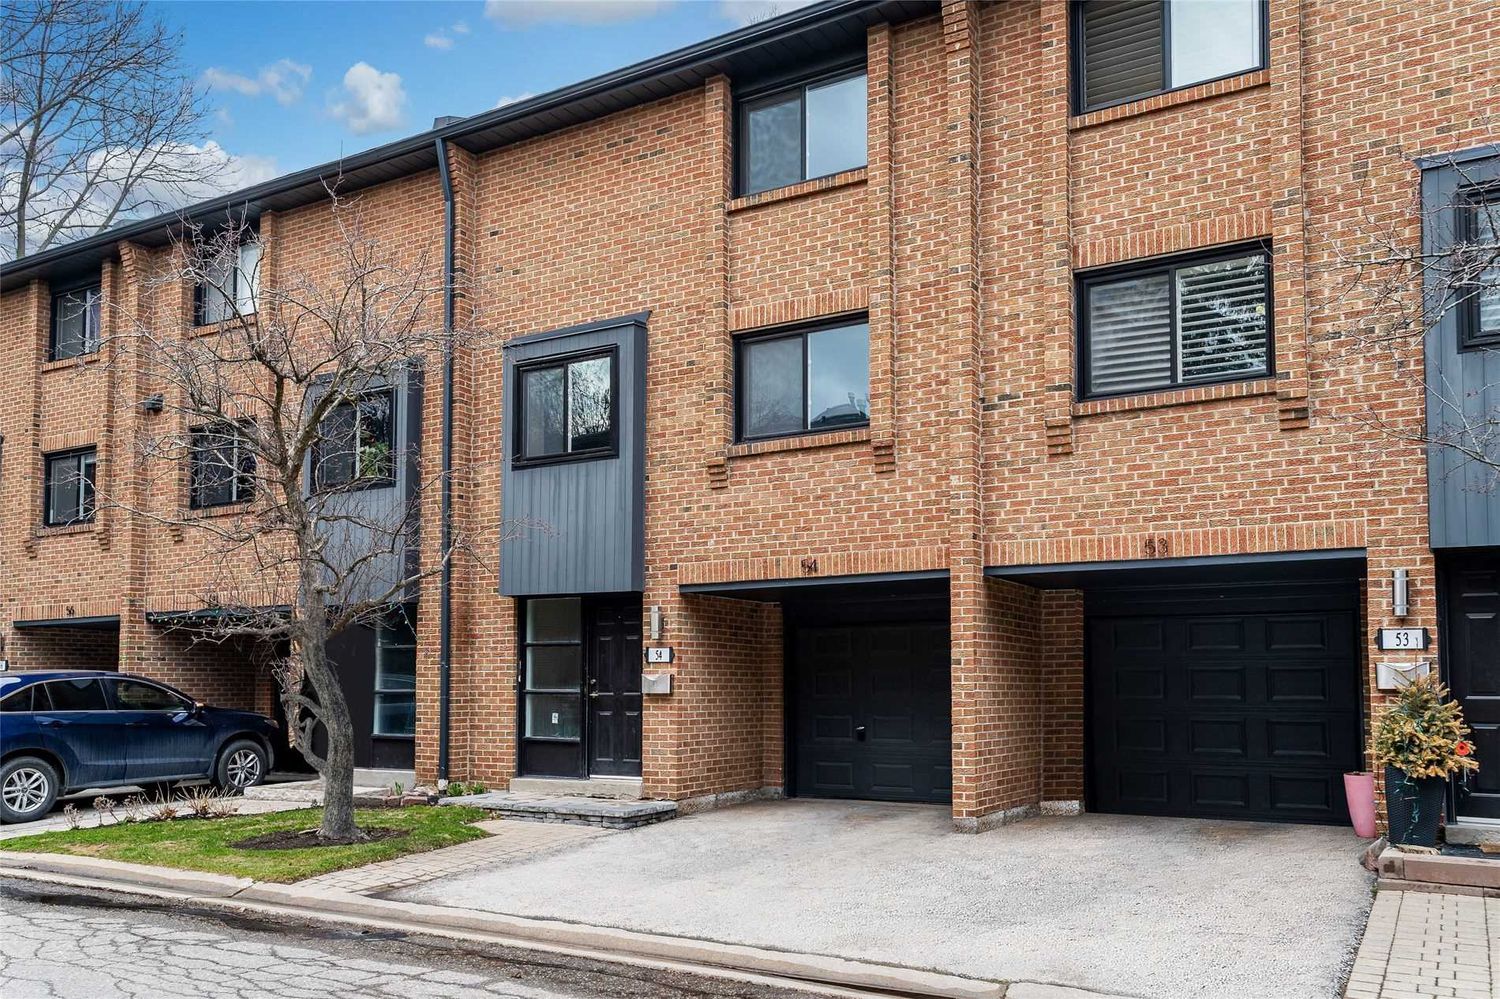 20 Mineola Road E. 20 Mineola Road East Townhomes is located in  Mississauga, Toronto - image #1 of 3